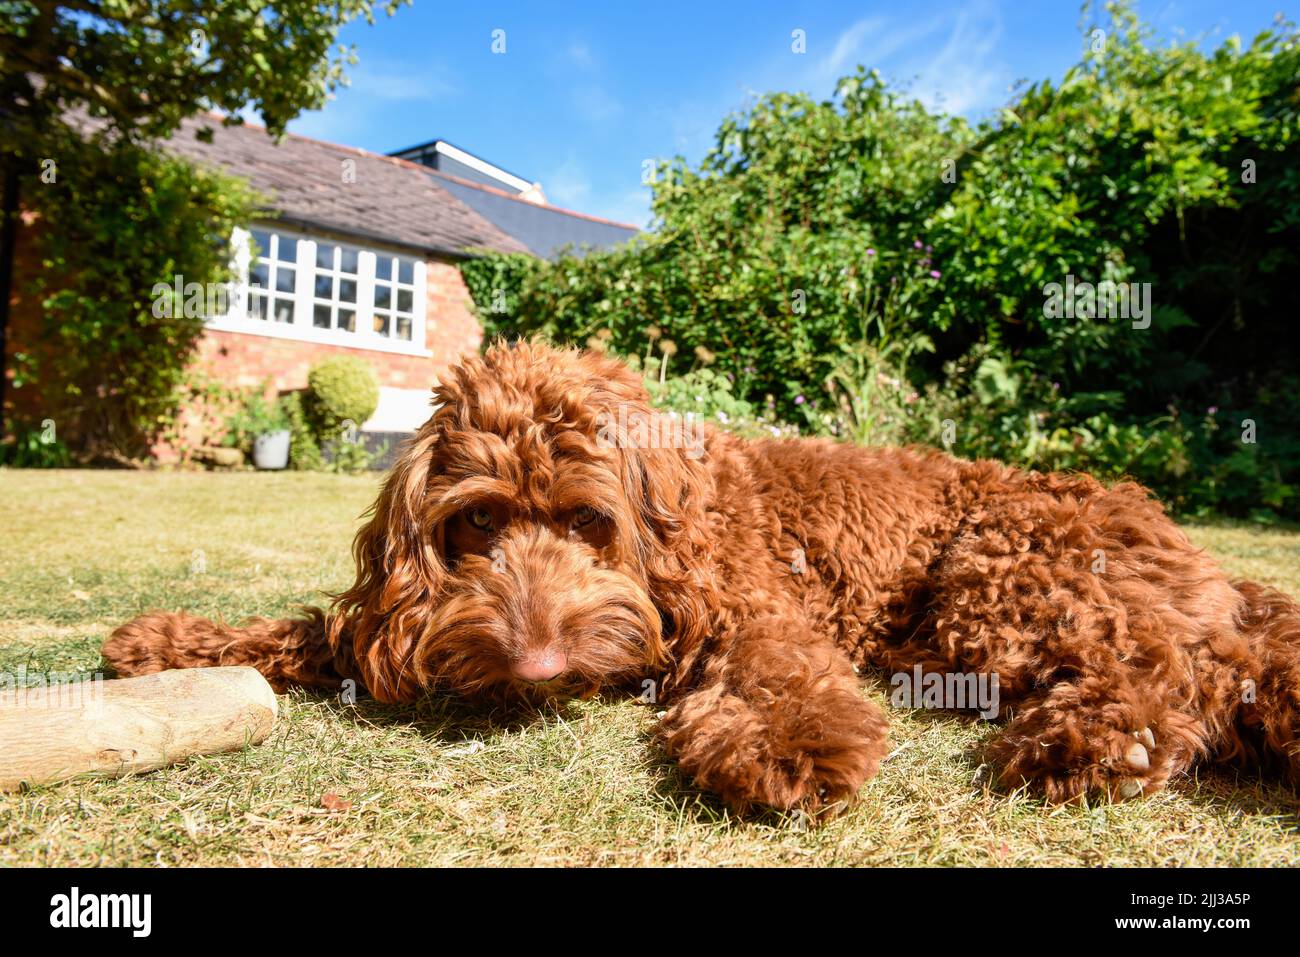 A pet puppy dog lying down on the lawn in a garden during hot weather Stock Photo